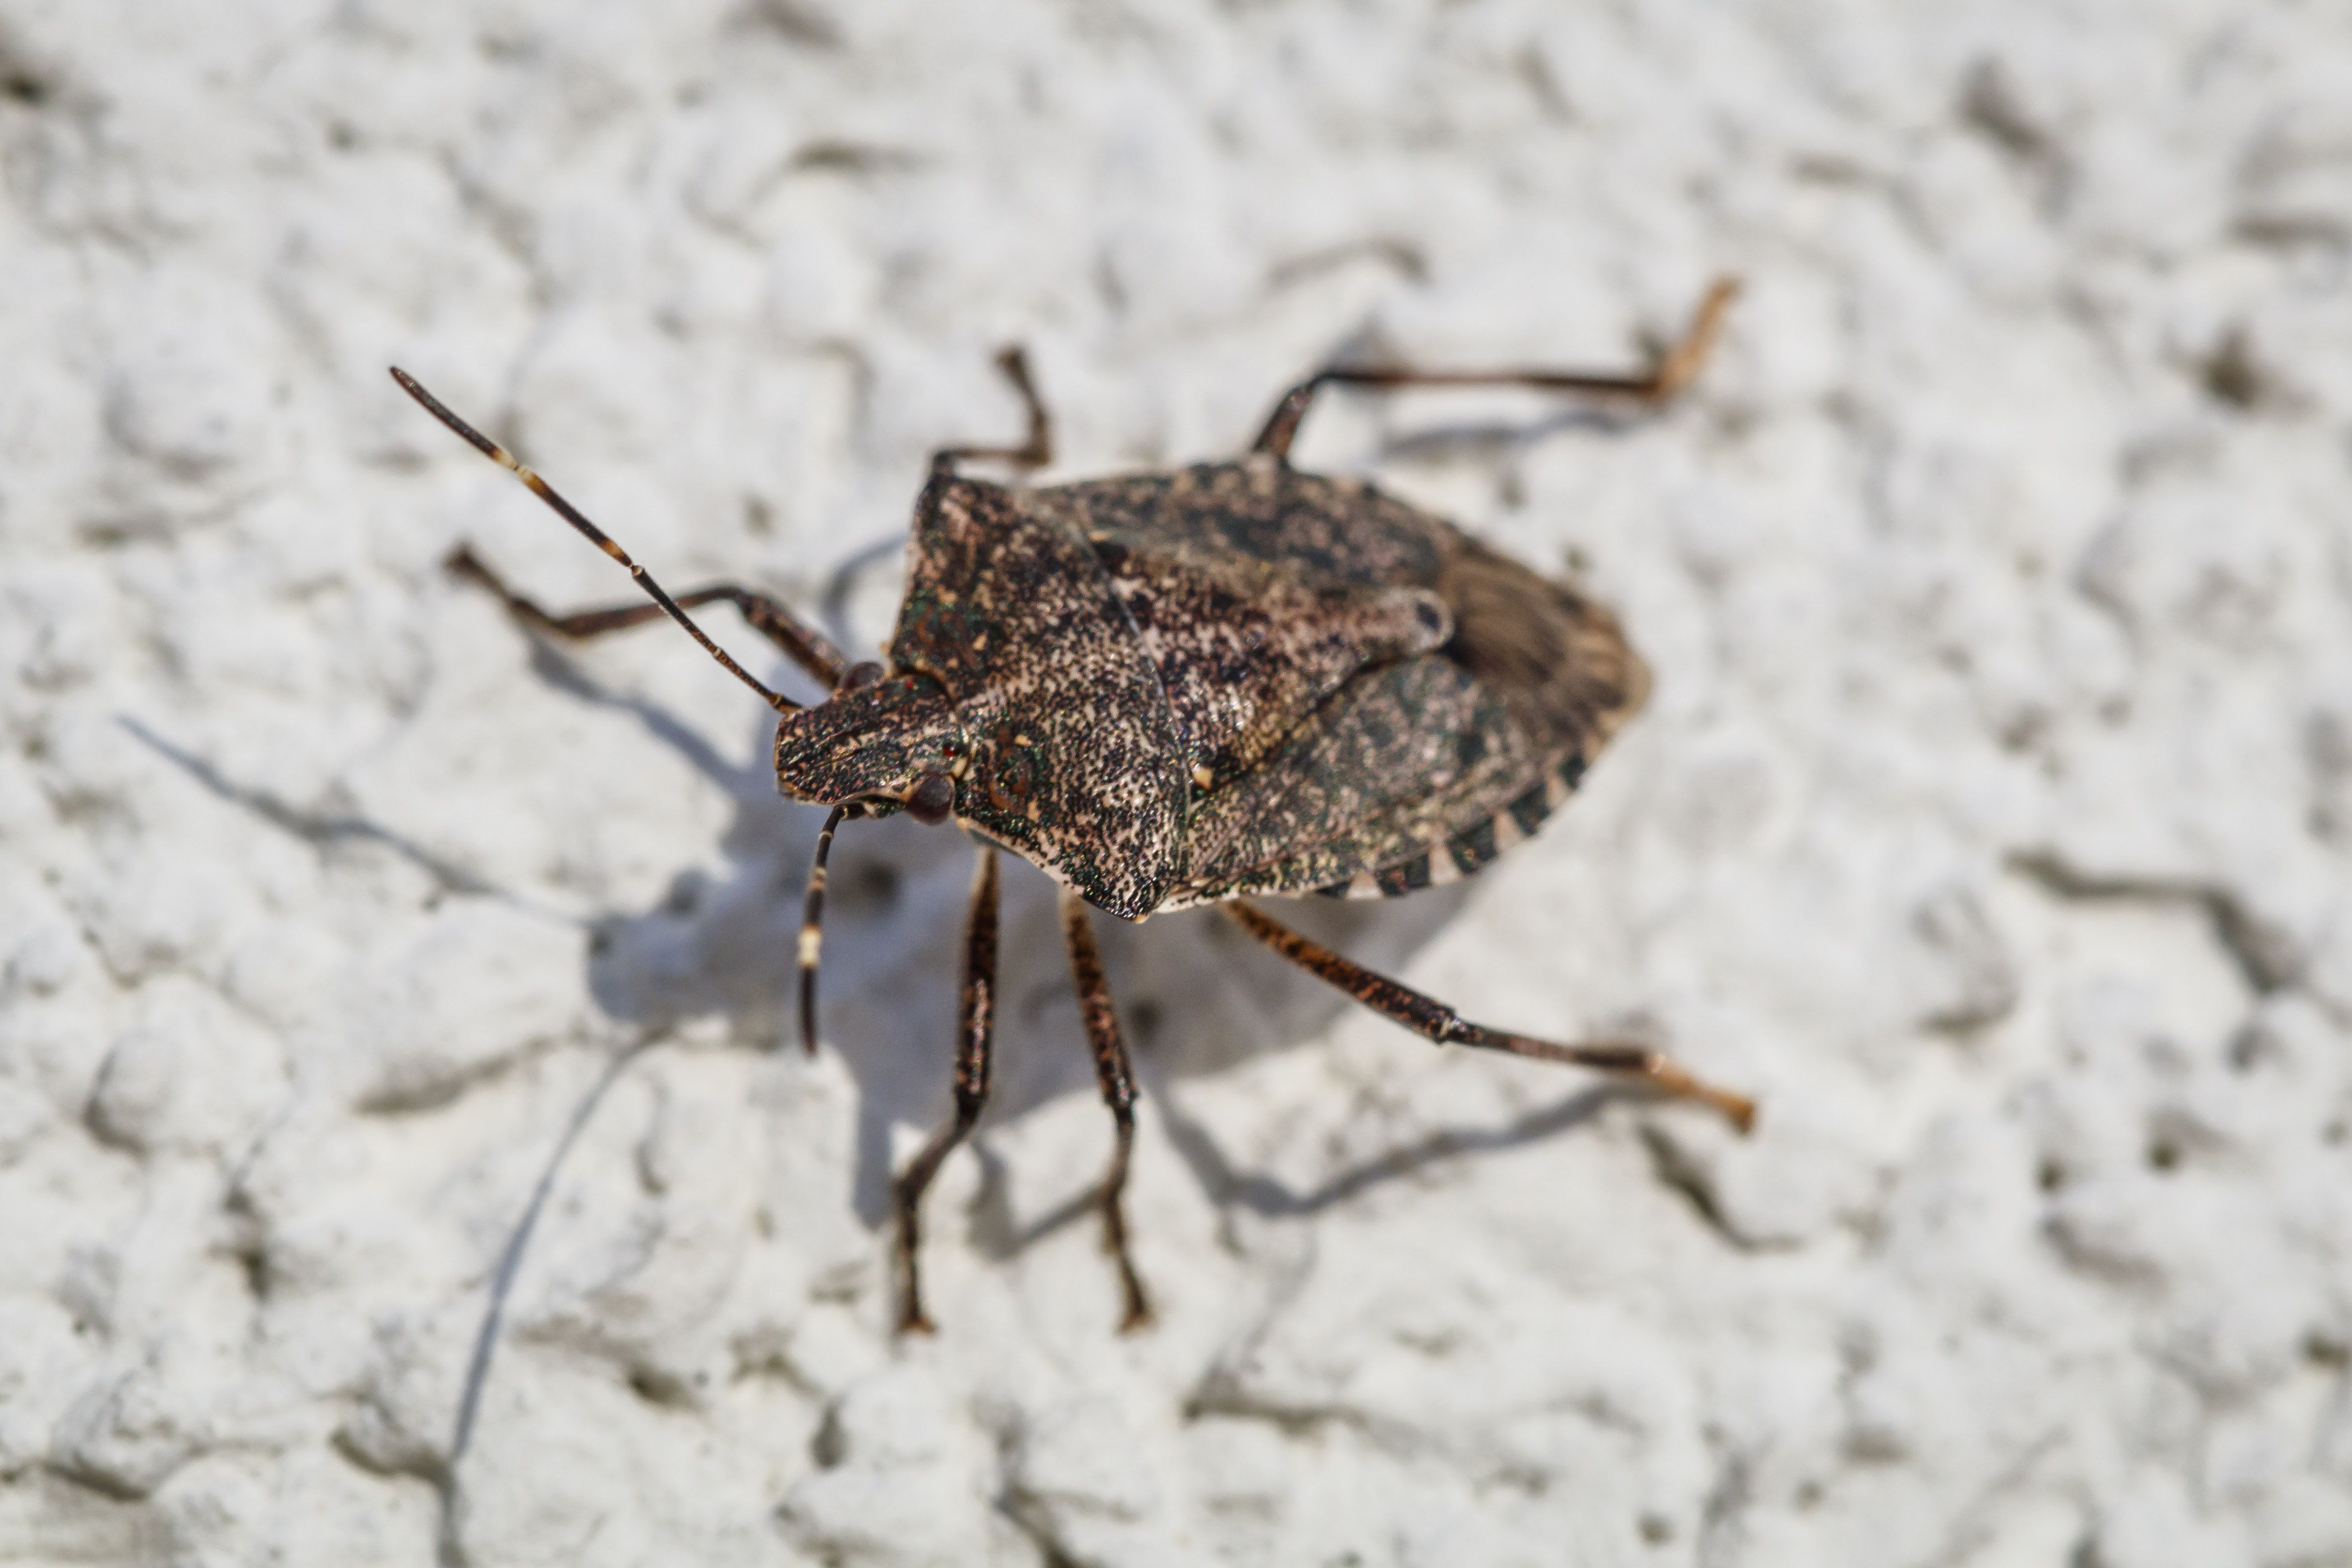 What Attracts Stink Bugs to My House? - 6 Reasons They Come Inside